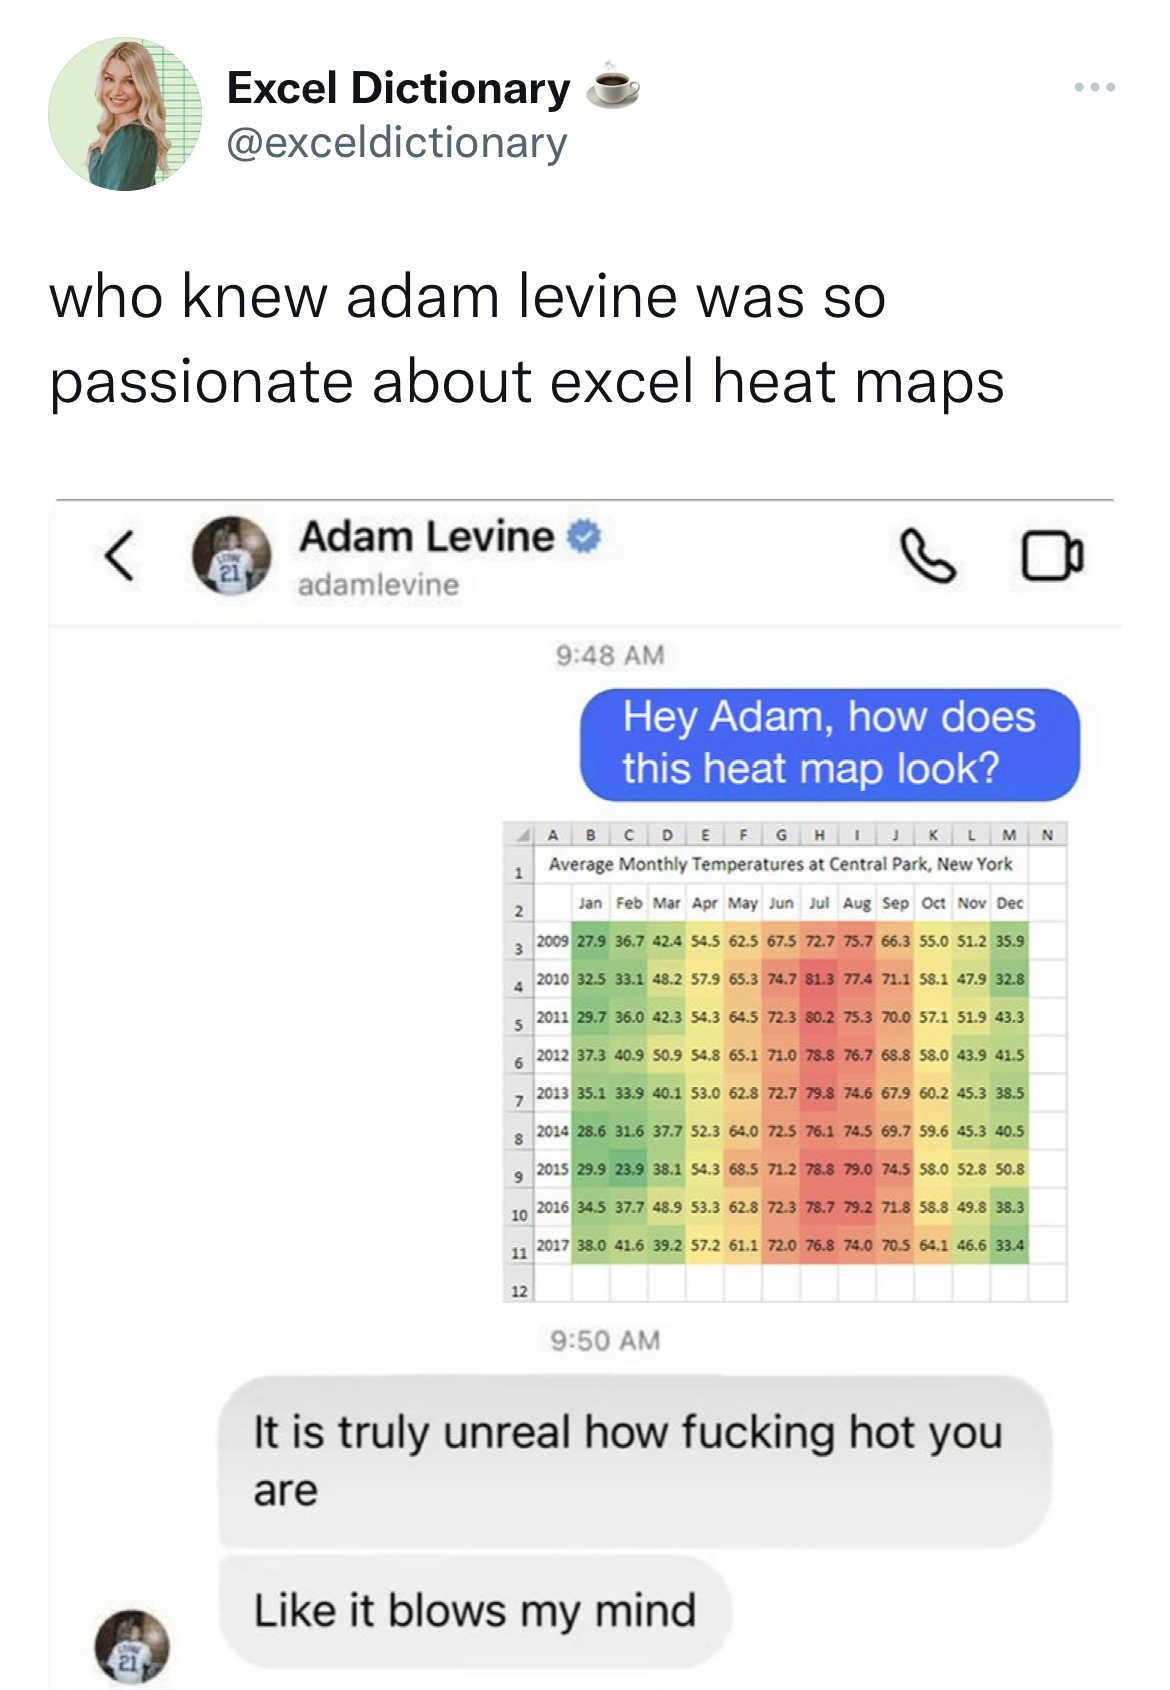 Adam Levine Sexting memes - web page - Excel Dictionary who knew adam levine was so passionate about excel heat maps